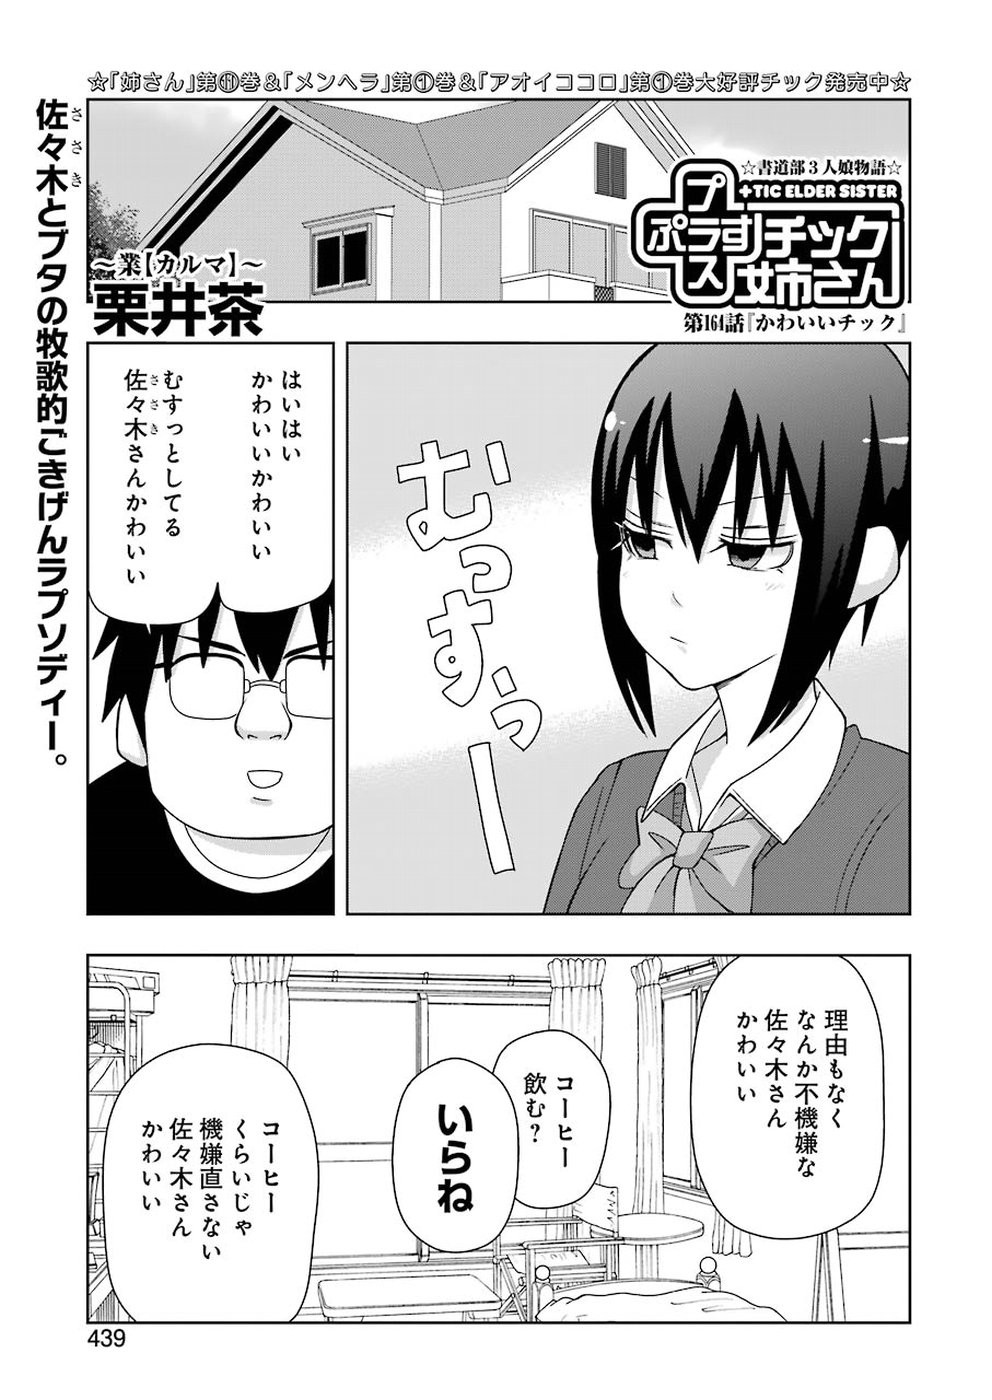 + Tic Nee-san - Chapter 164 - Page 1